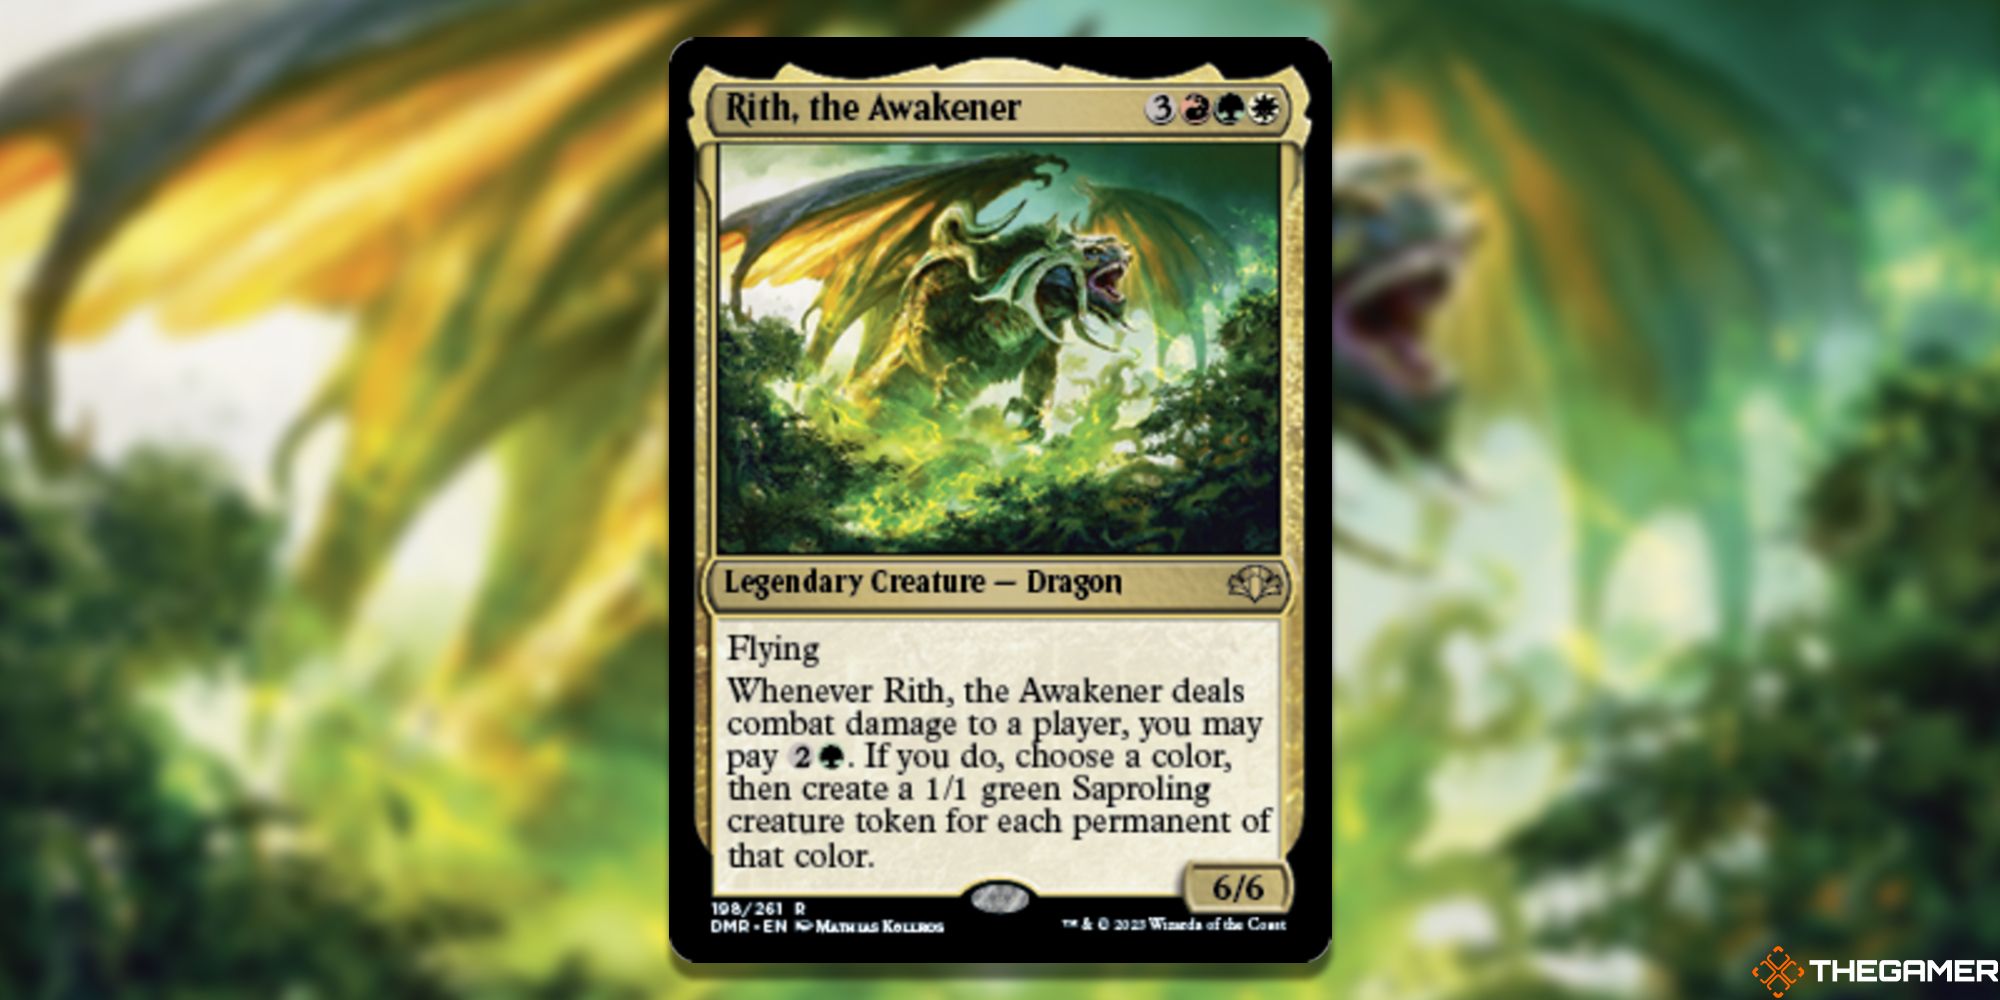 The card Rith, the Awakener from Magic: The Gathering.